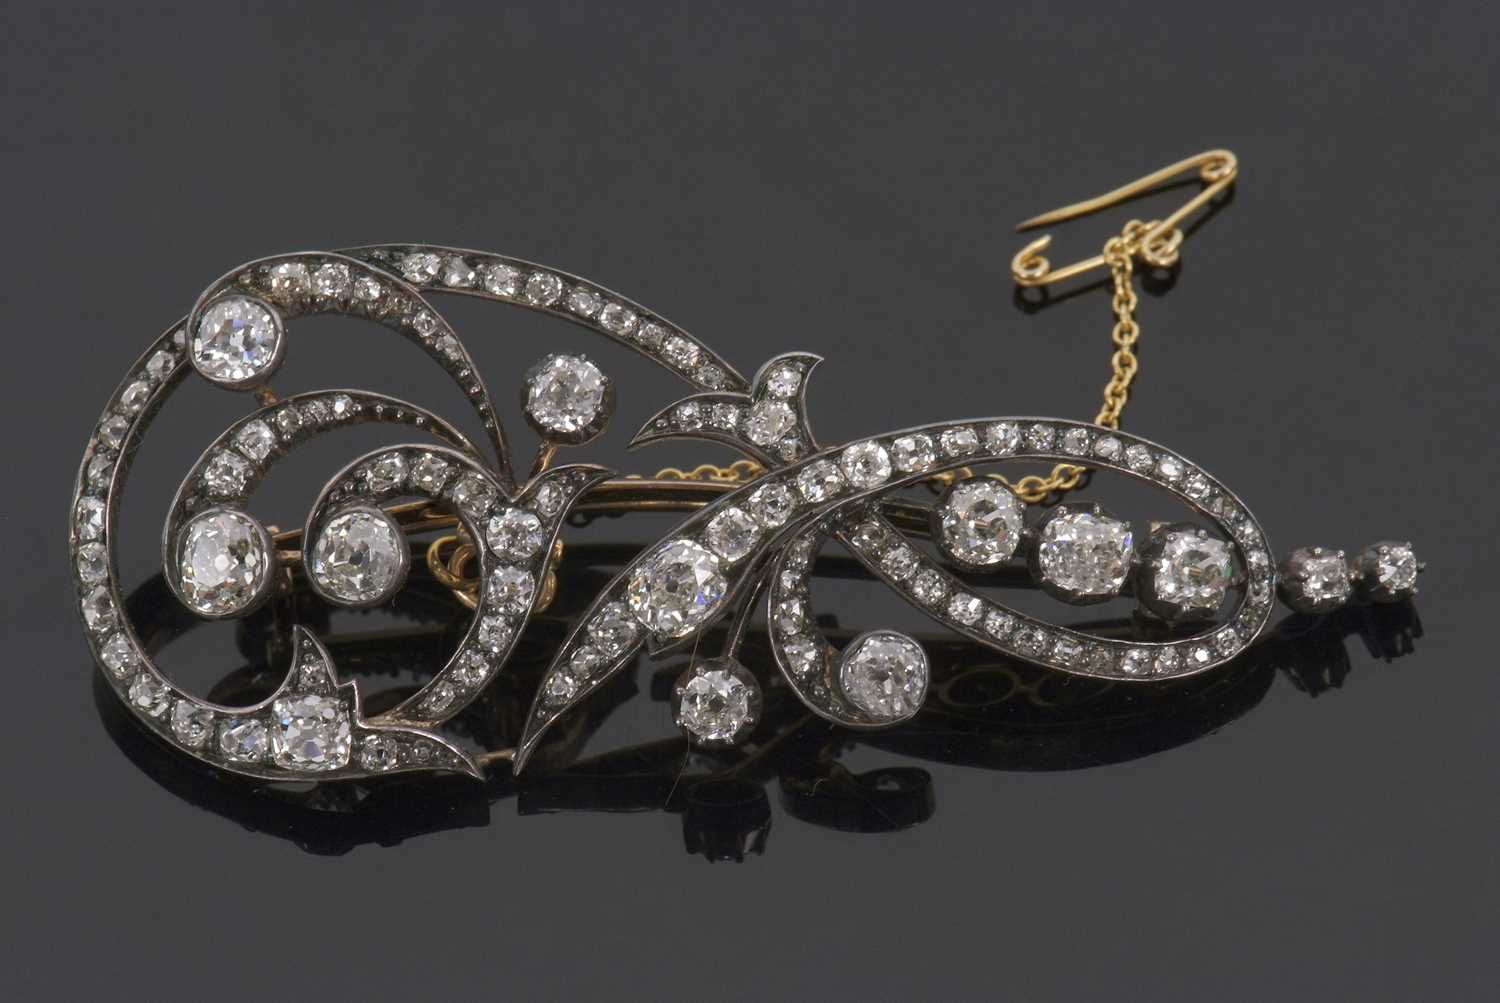 A 19th century diamond brooch, comprised of flourishes set with old mine cut diamonds, total